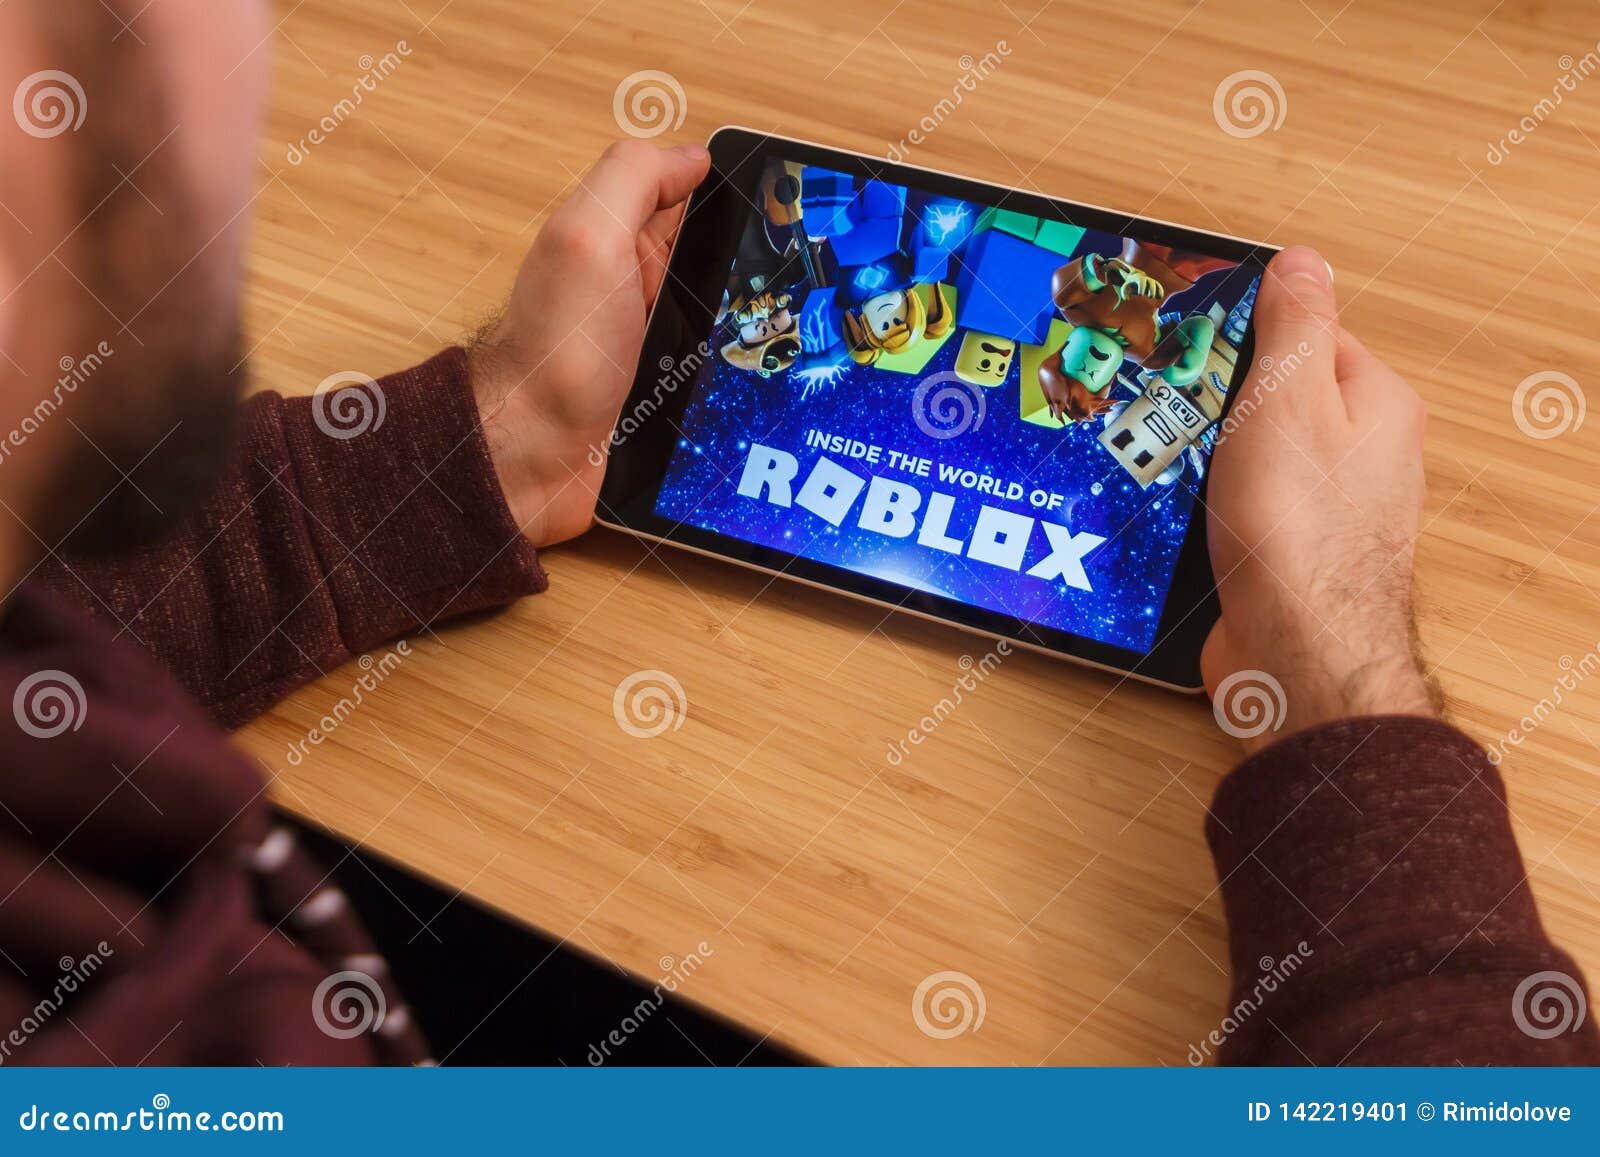 Prague Czech Republic March 16 2019 Man Holding A Smartphone - prague czech republic march 16 2019 man holding a smartphone and playng the roblox mobile game an illustrative editorial image on an bamboo background